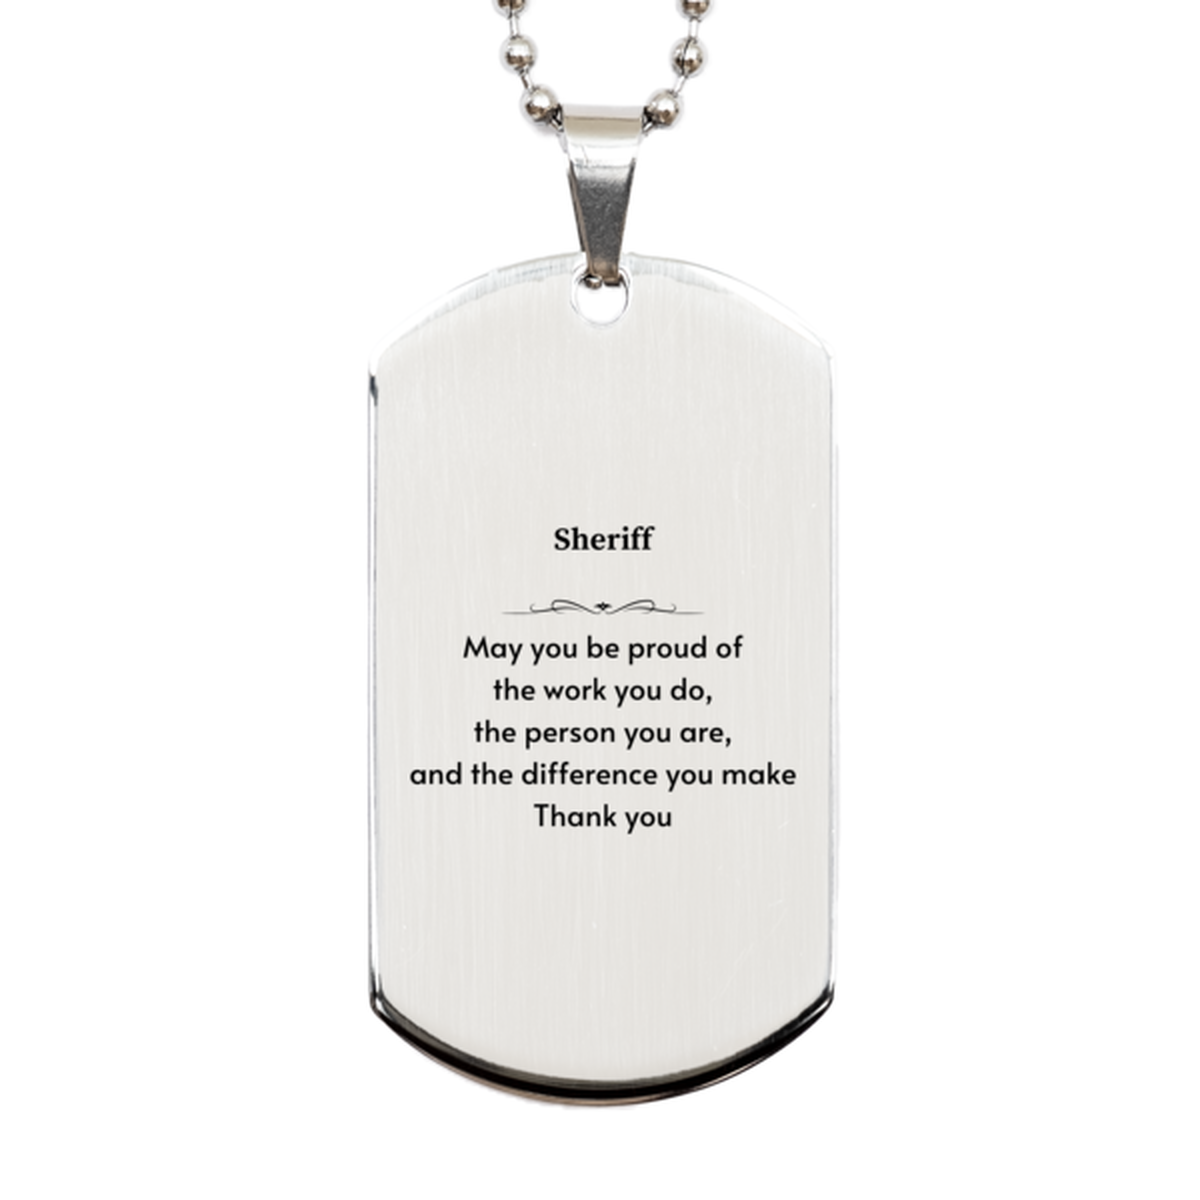 Heartwarming Silver Dog Tag Retirement Coworkers Gifts for Sheriff, Sheriff May You be proud of the work you do, the person you are Gifts for Boss Men Women Friends